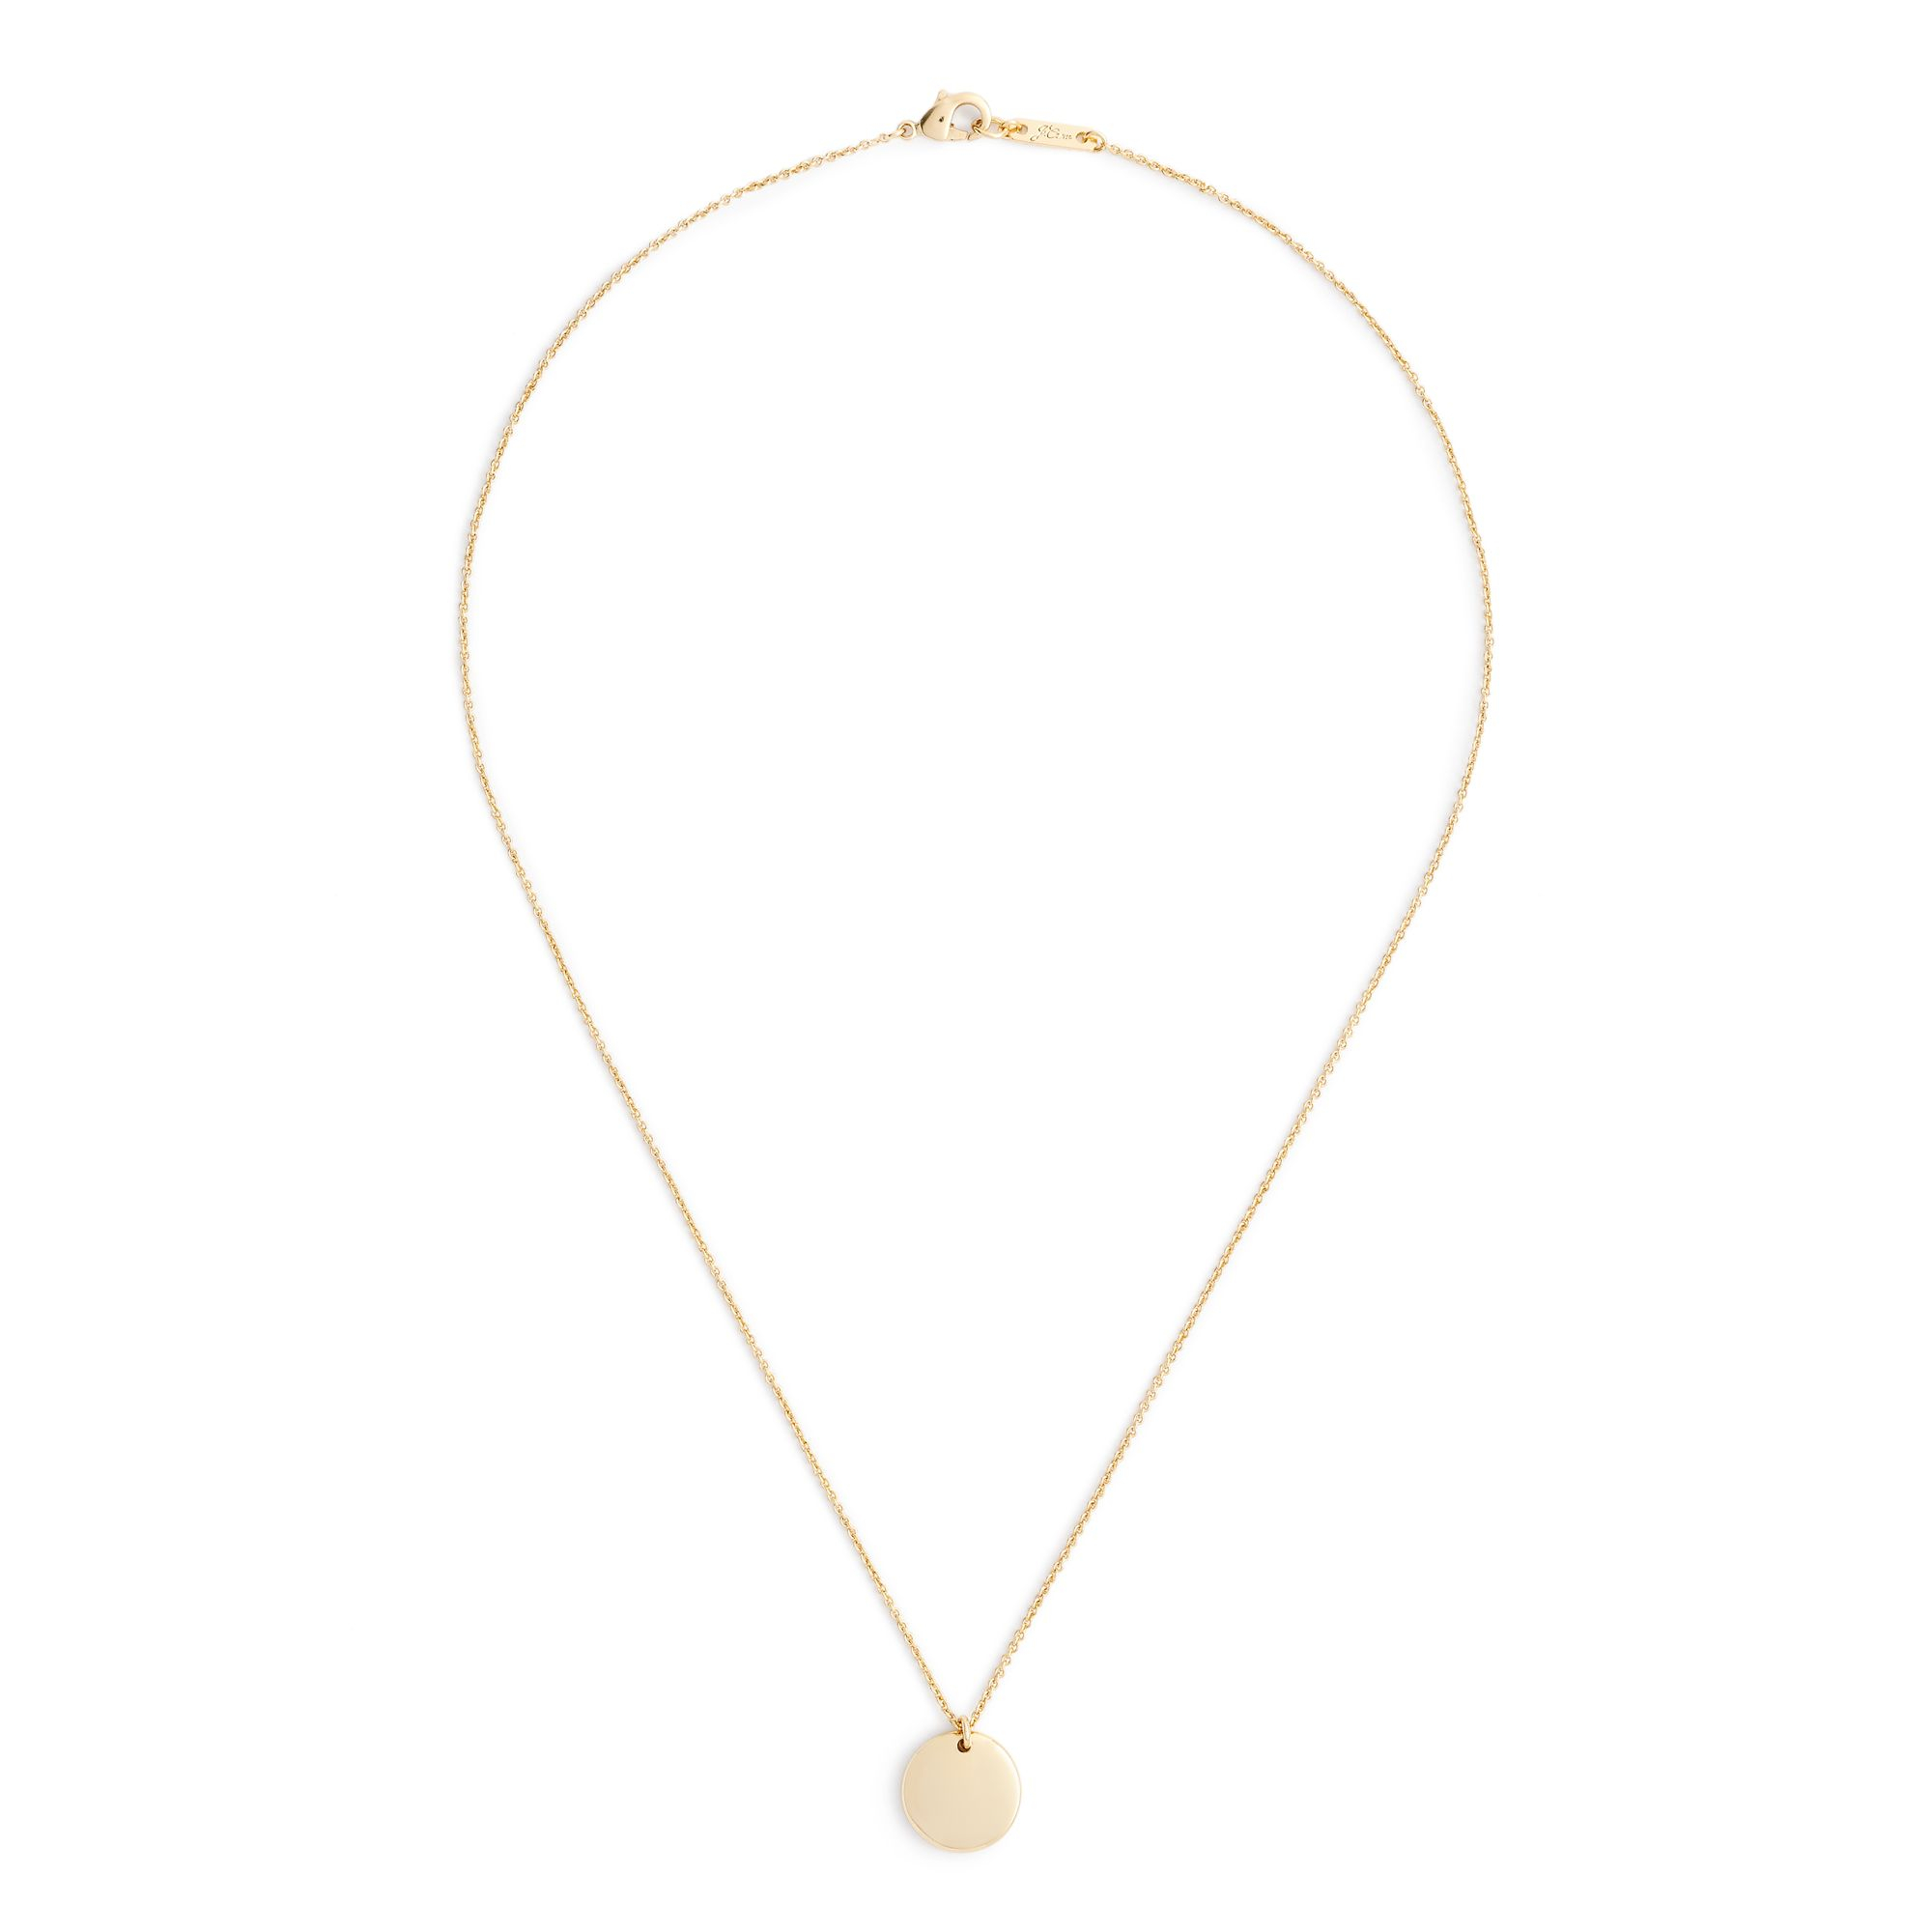 J.crew 14k Gold Circle Charm Necklace With 16